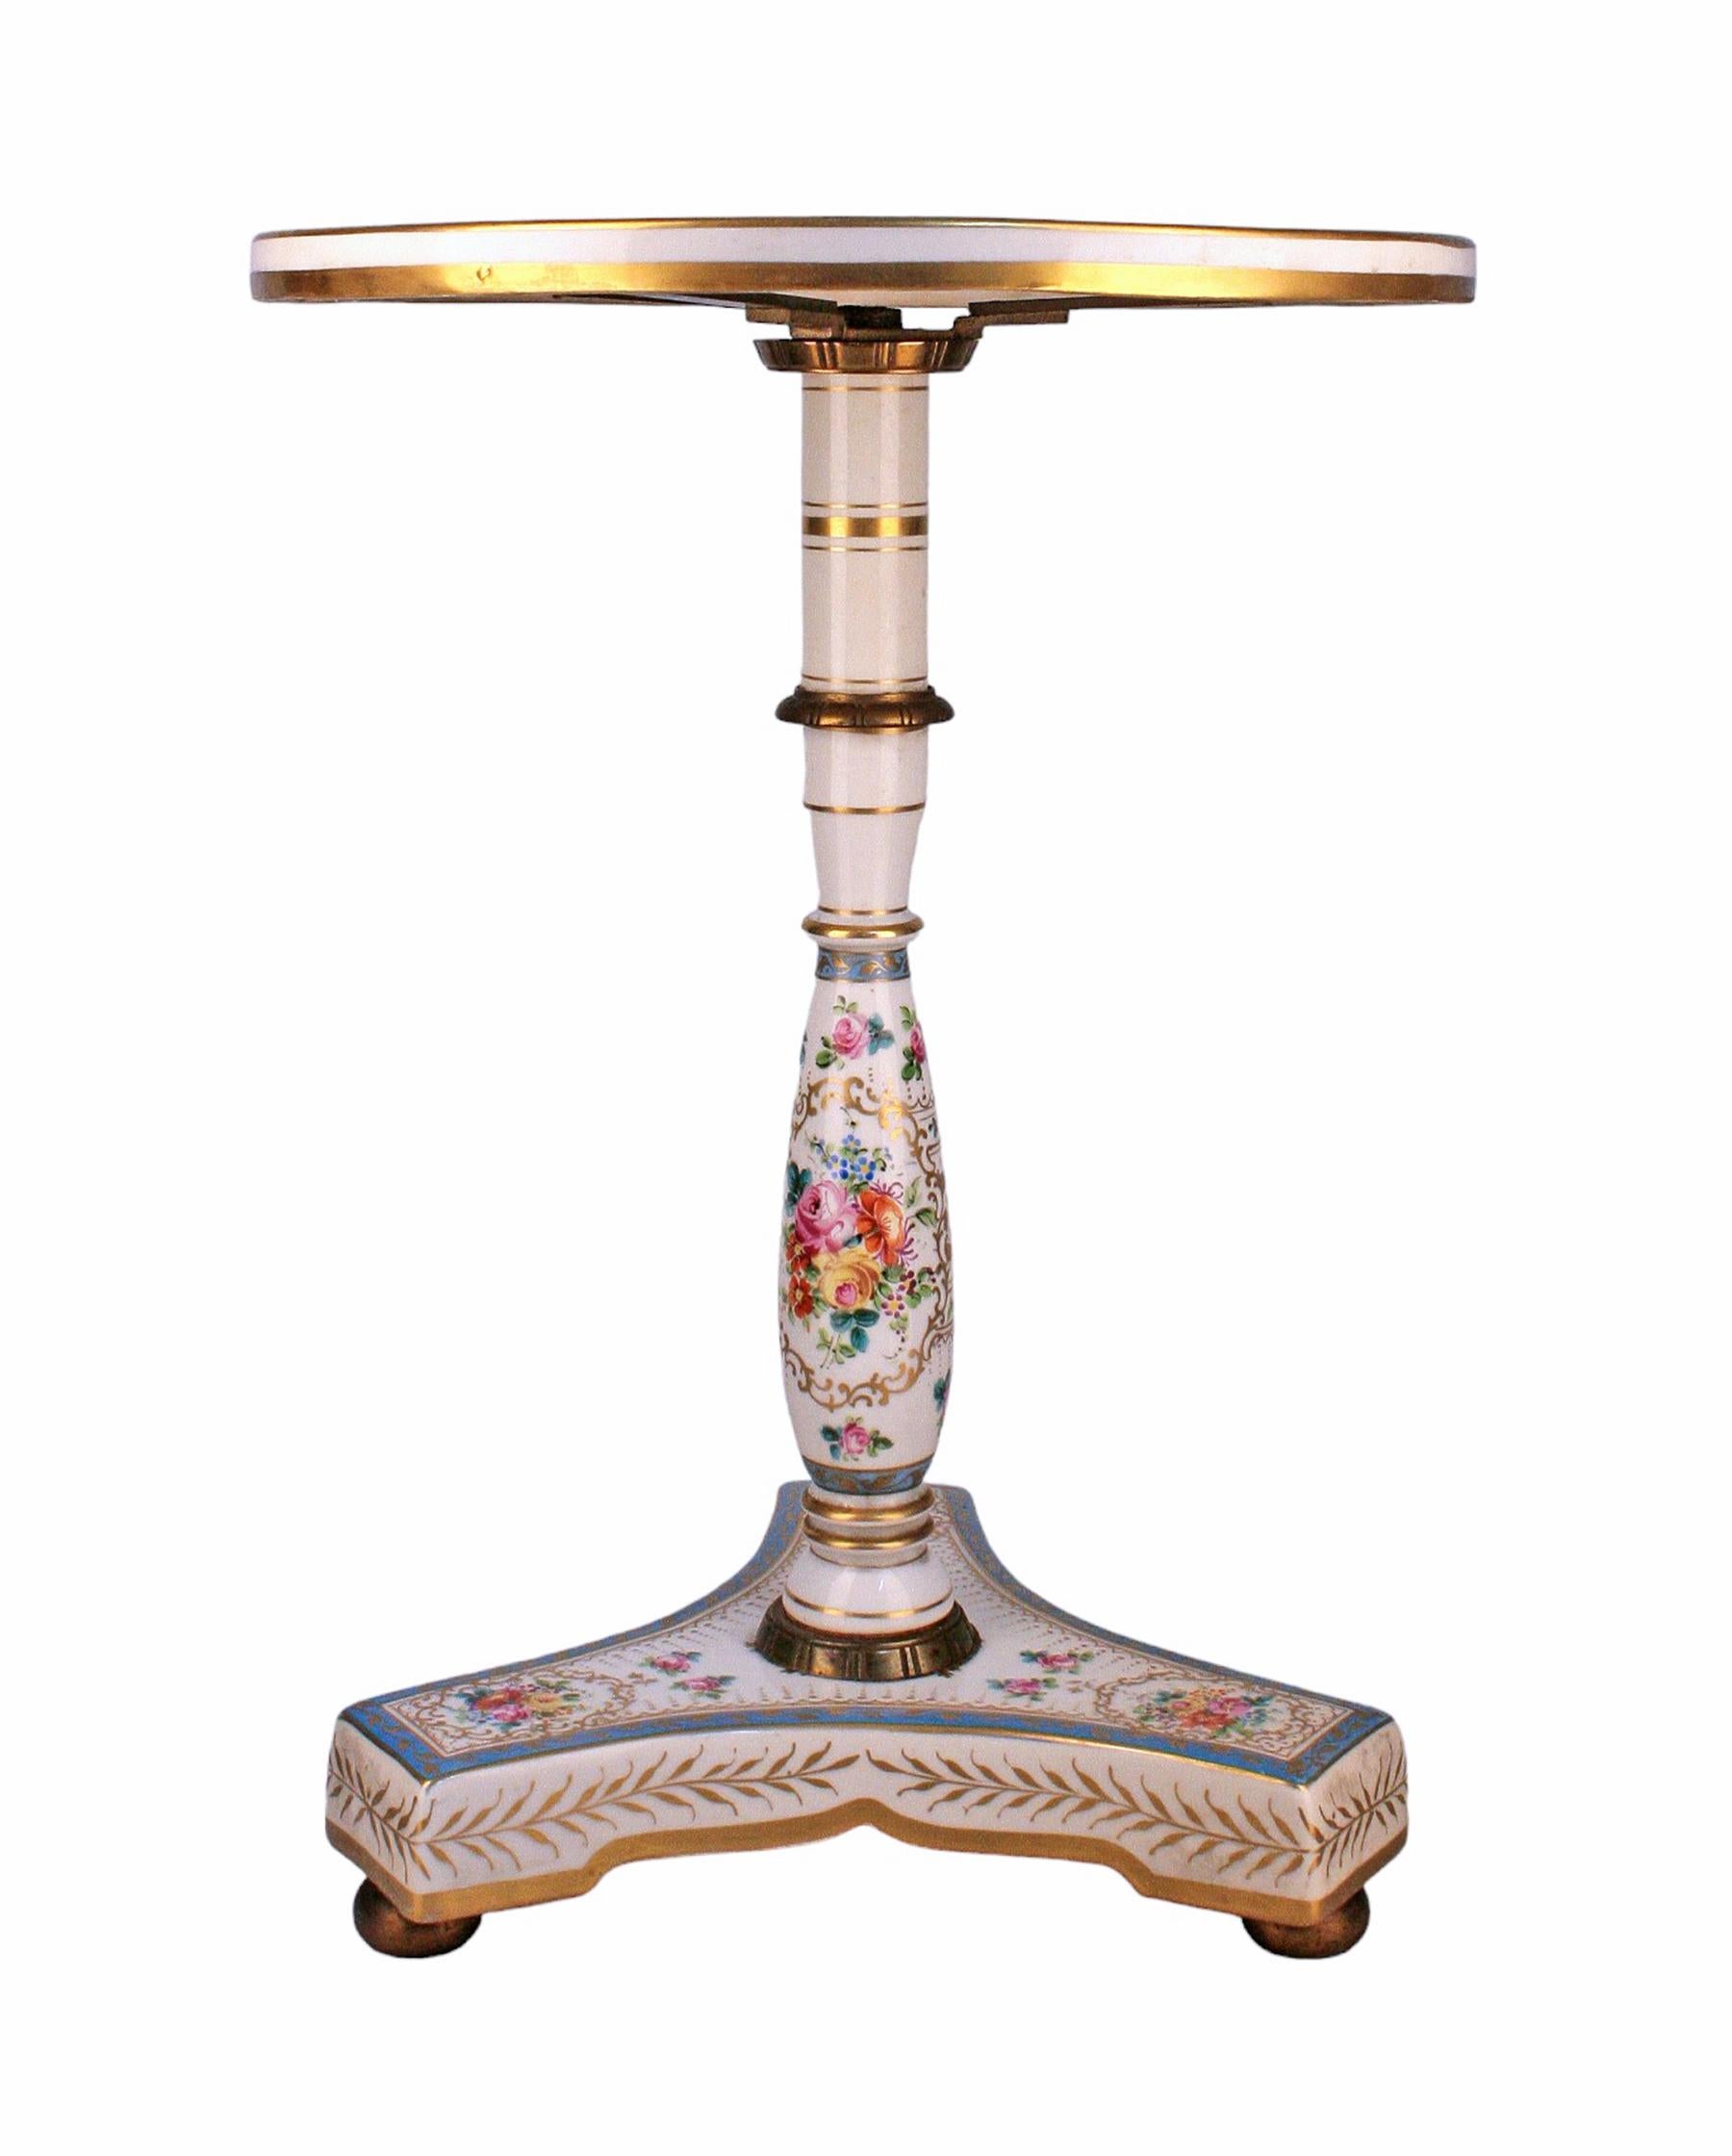 Late 19th century Napoleon III painted porcelain circular pedestal table with floral motifs made in France

By: unknown
Material: bronze, copper, ceramic, porcelain, paint, enamel, metal
Technique: cast, gilt, molded, pressed, painted, hand-painted,